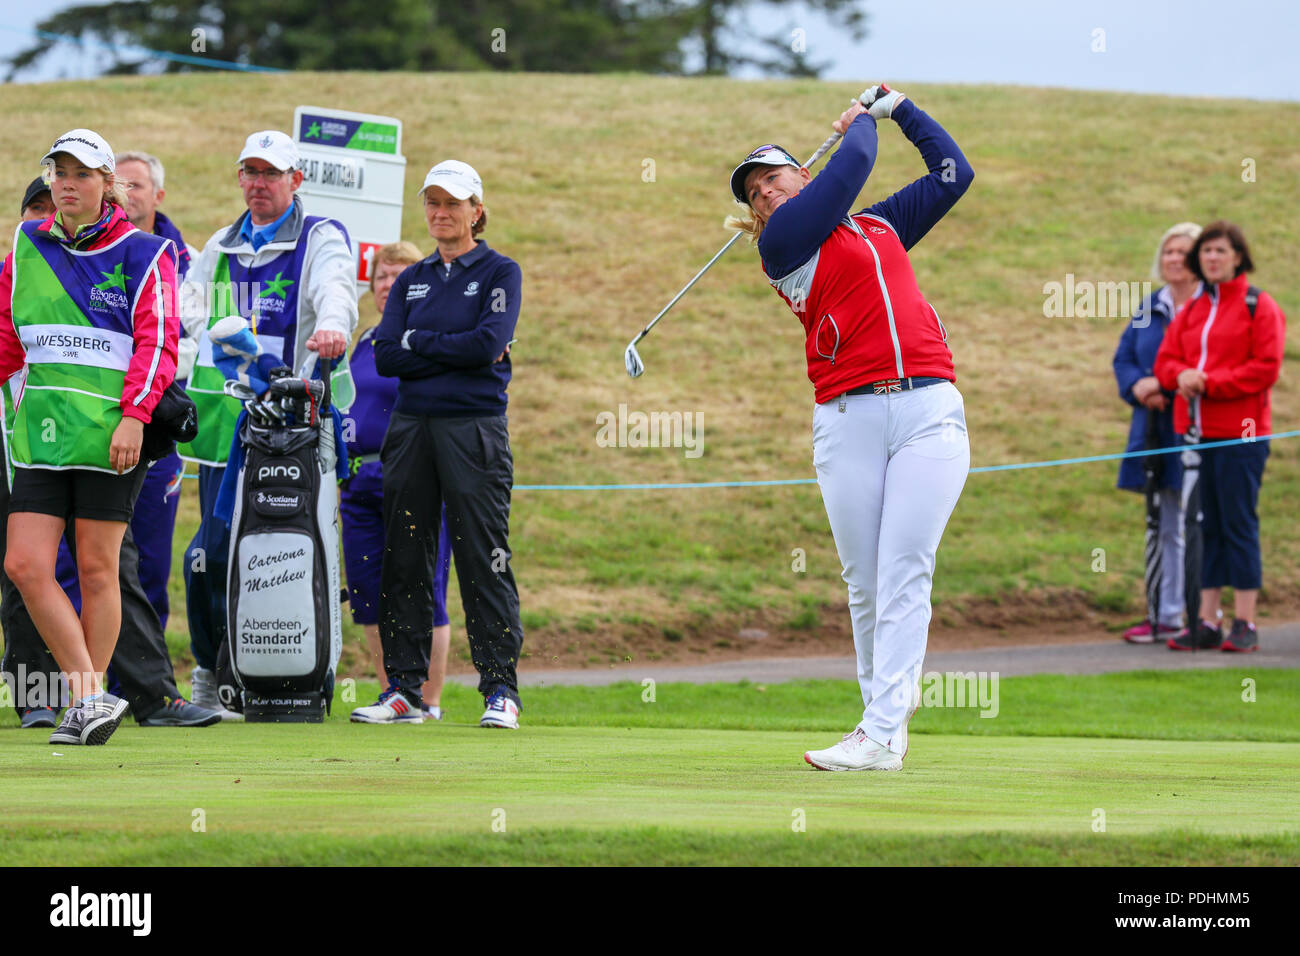 Gleneagles, Scotland, UK. 10th August, 2018. The Fourball Match Play continues with the pairing of Catriona Matthew and Holly Clyburn representing Great Britain playing against Cajsa Persson and Linda Wessberg of Sweden. Clyburn teeing off at the 4th hole. Credit: Findlay/Alamy Live News Stock Photo